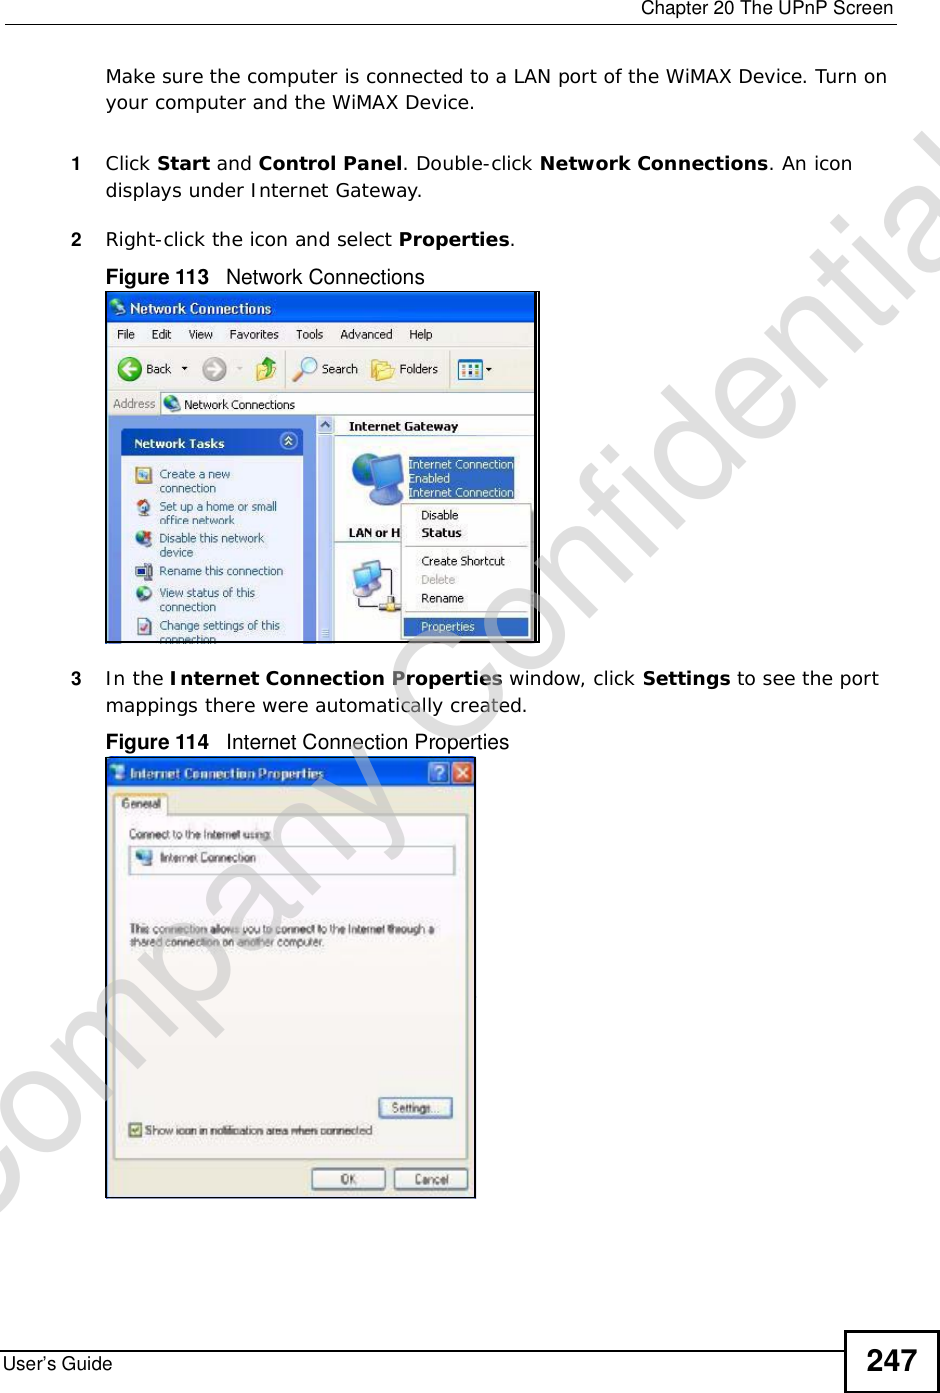  Chapter 20The UPnP ScreenUser’s Guide 247Make sure the computer is connected to a LAN port of the WiMAX Device. Turn on your computer and the WiMAX Device. 1Click Start and Control Panel. Double-click Network Connections. An icon displays under Internet Gateway.2Right-click the icon and select Properties.Figure 113   Network Connections3In the Internet Connection Properties window, click Settings to see the port mappings there were automatically created. Figure 114   Internet Connection Properties Company Confidential